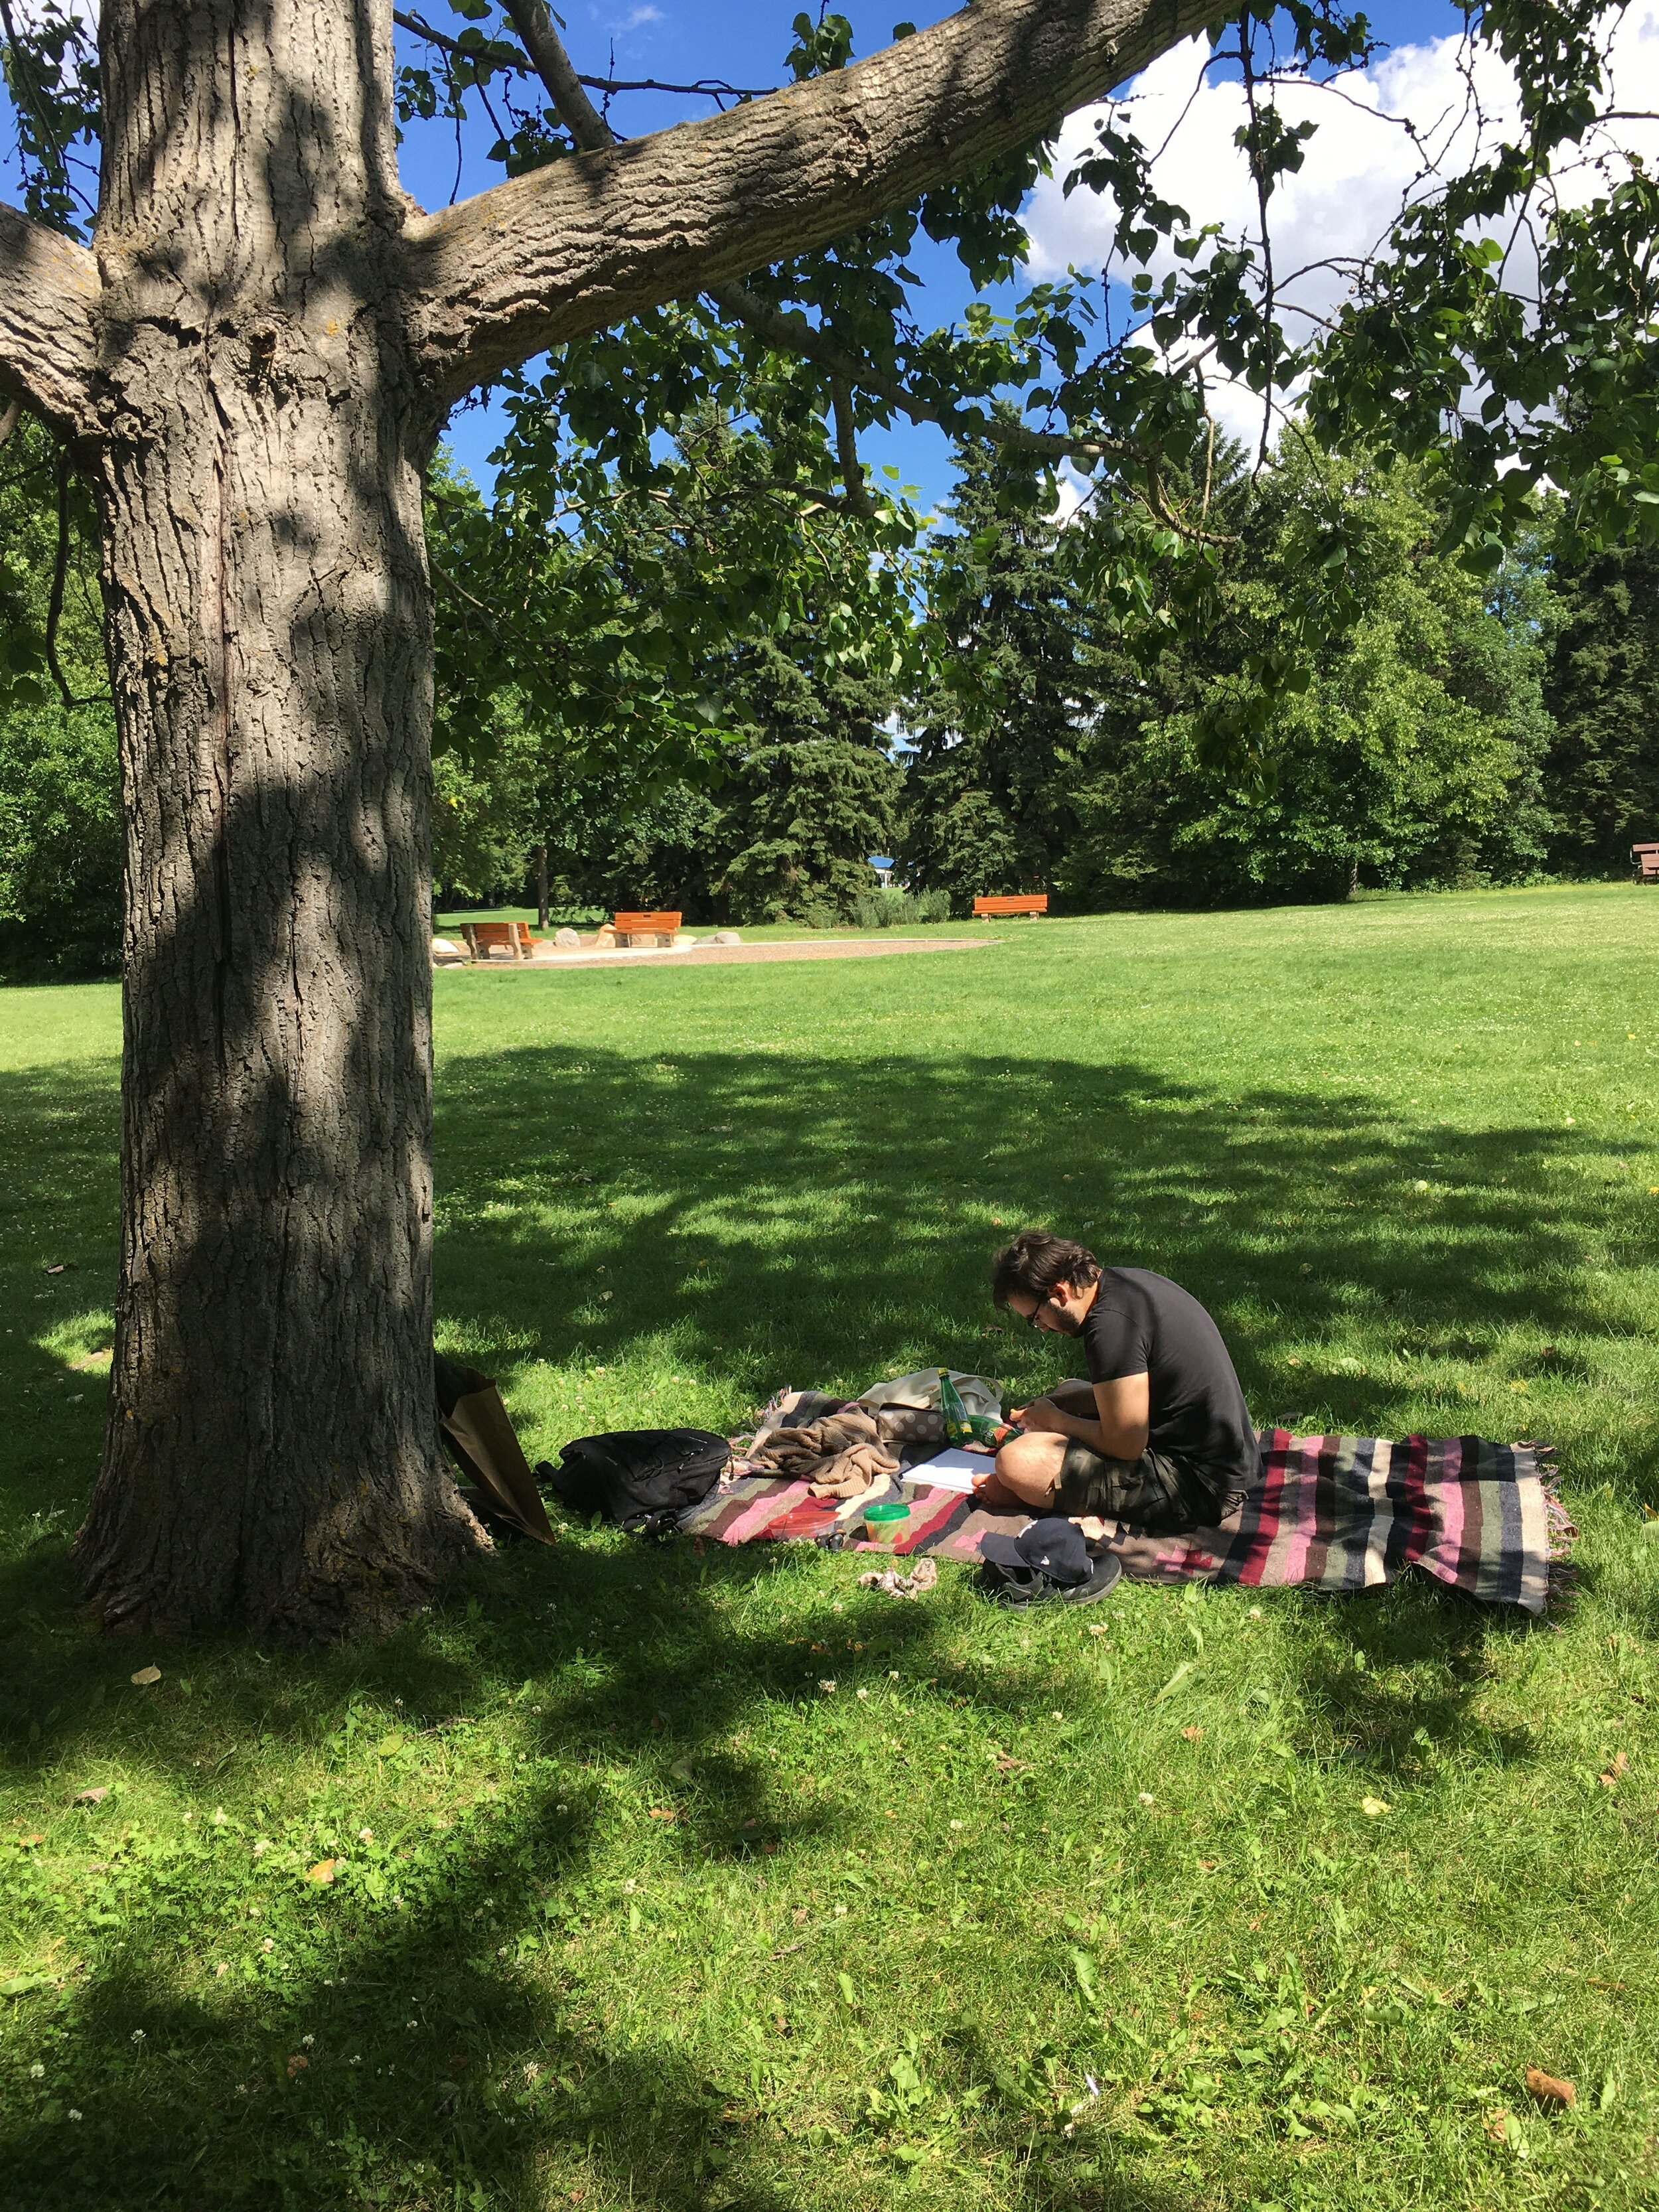 from a picnic with my partner last summerimage description: male presenting person looking at his lap while sitting on a colourful blanket beneath the shade of a tree.